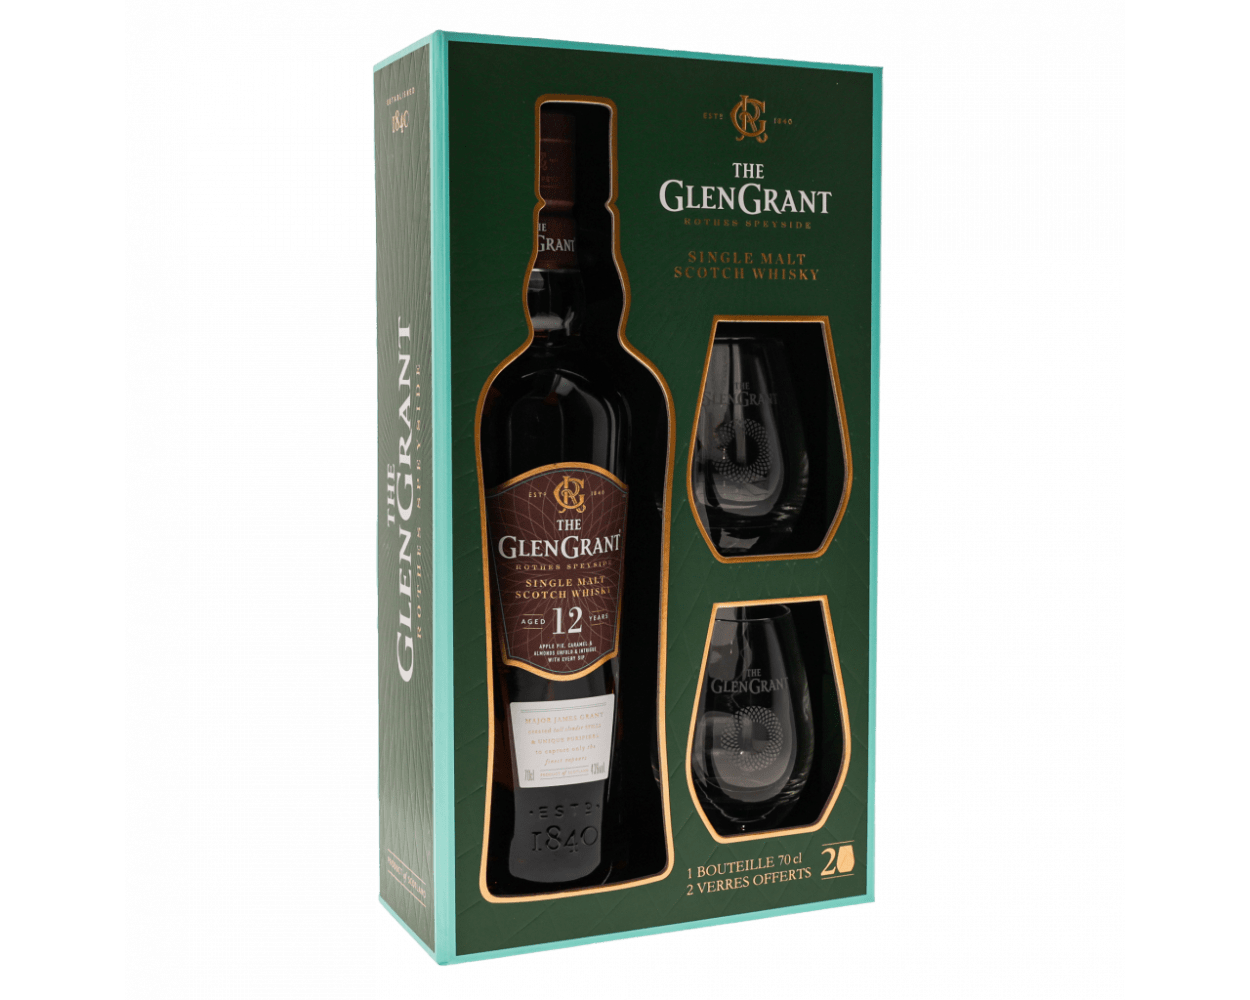 The Glen Grant Rothes Speyside 12 Year Old